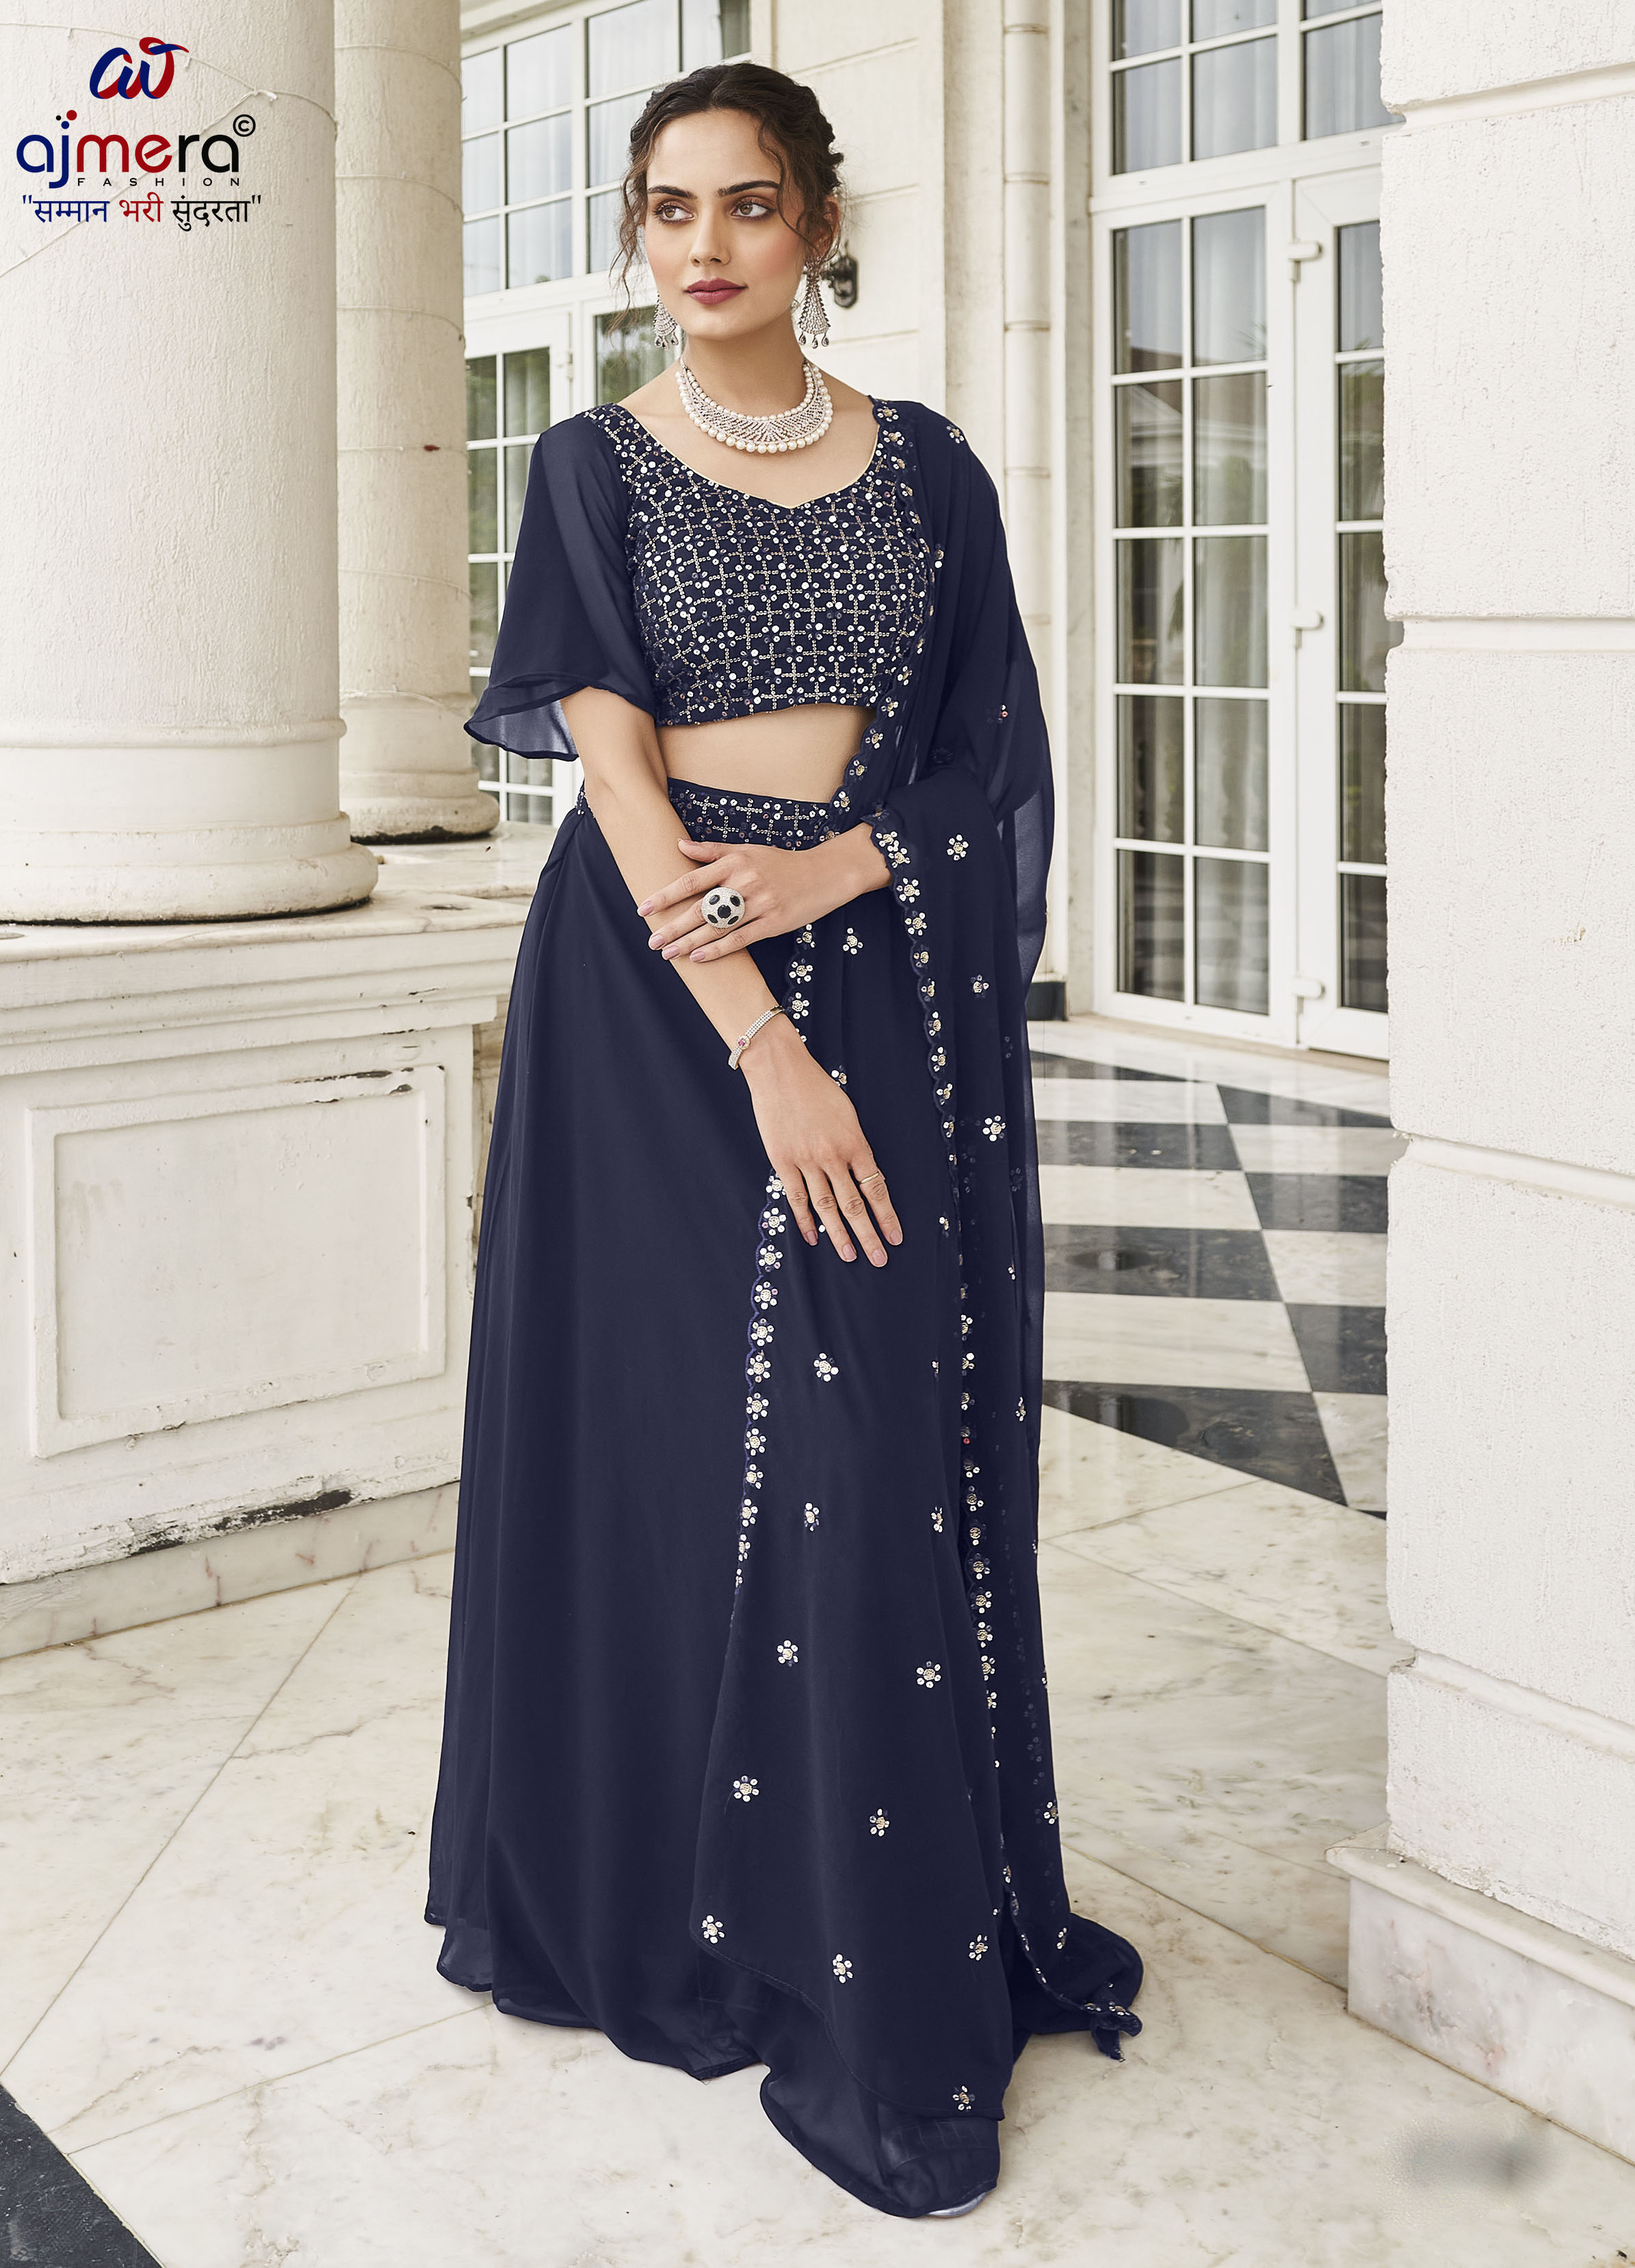 Partywear Lahenga Manufacturers, Suppliers in Lucknow